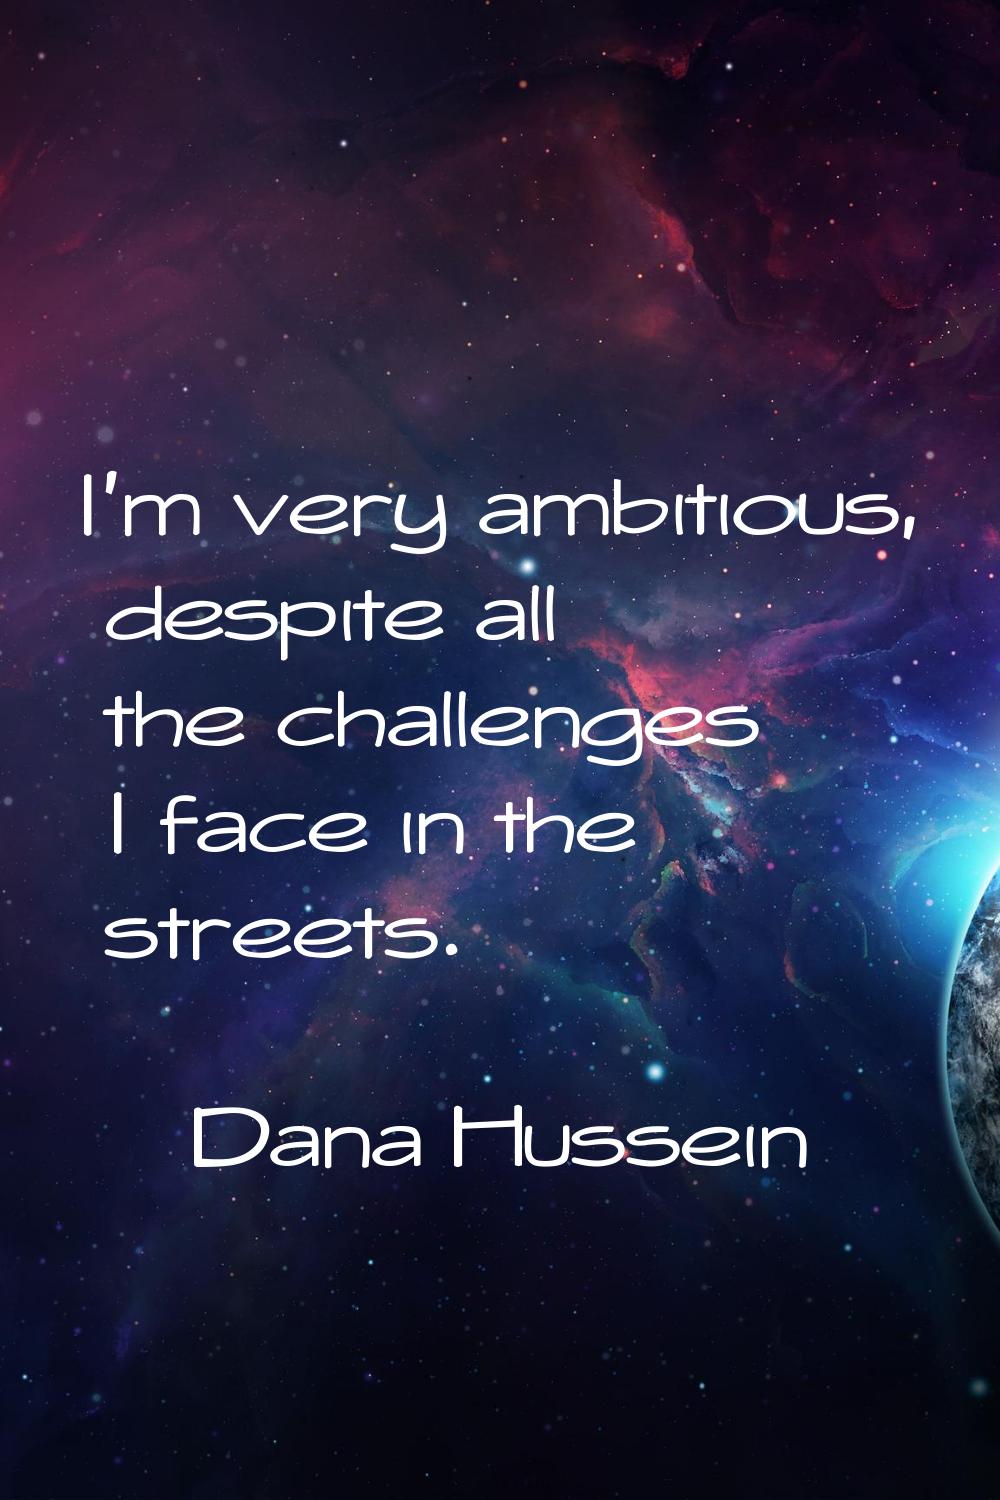 I'm very ambitious, despite all the challenges I face in the streets.